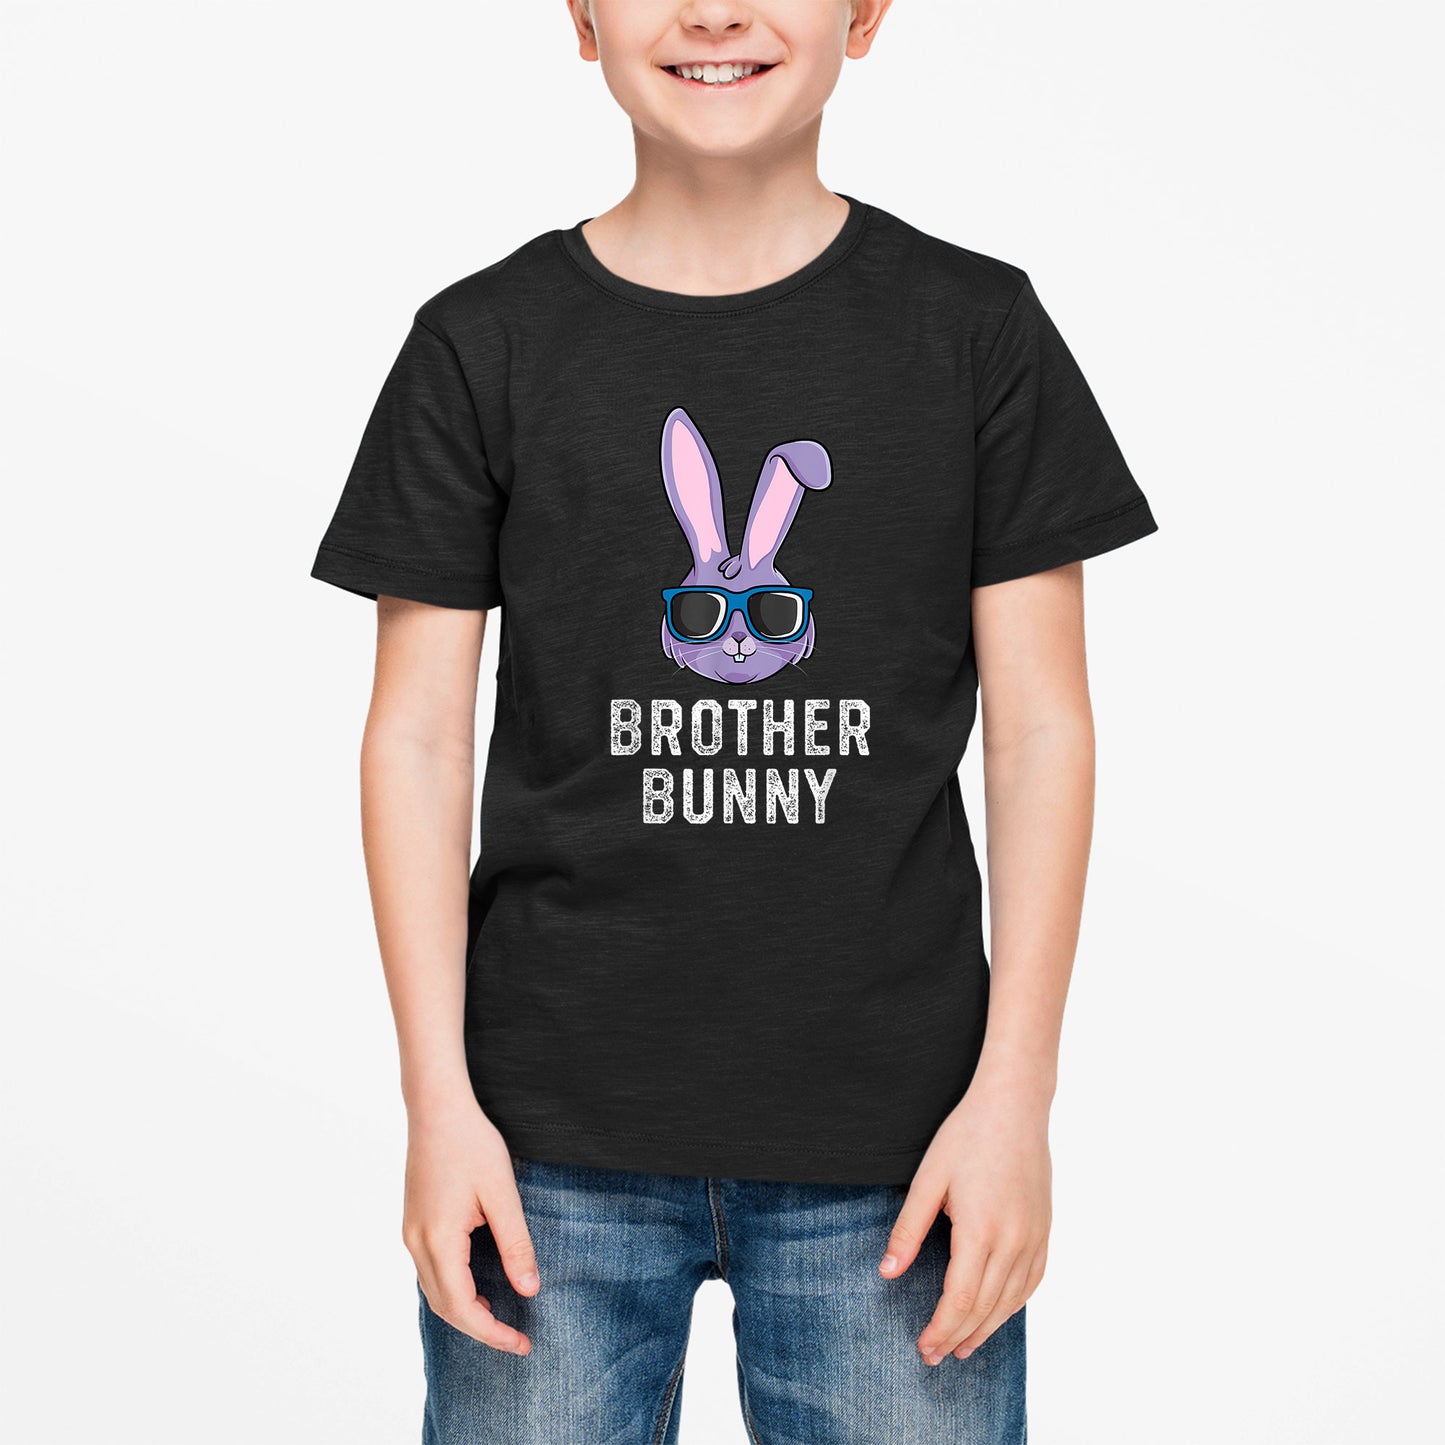 Brother Bunny Shirt, Brother Matching Family Easter Shirt, Boys Easter Shirt, Easter Gifts For Kids, Easter Gifts For Toddlers